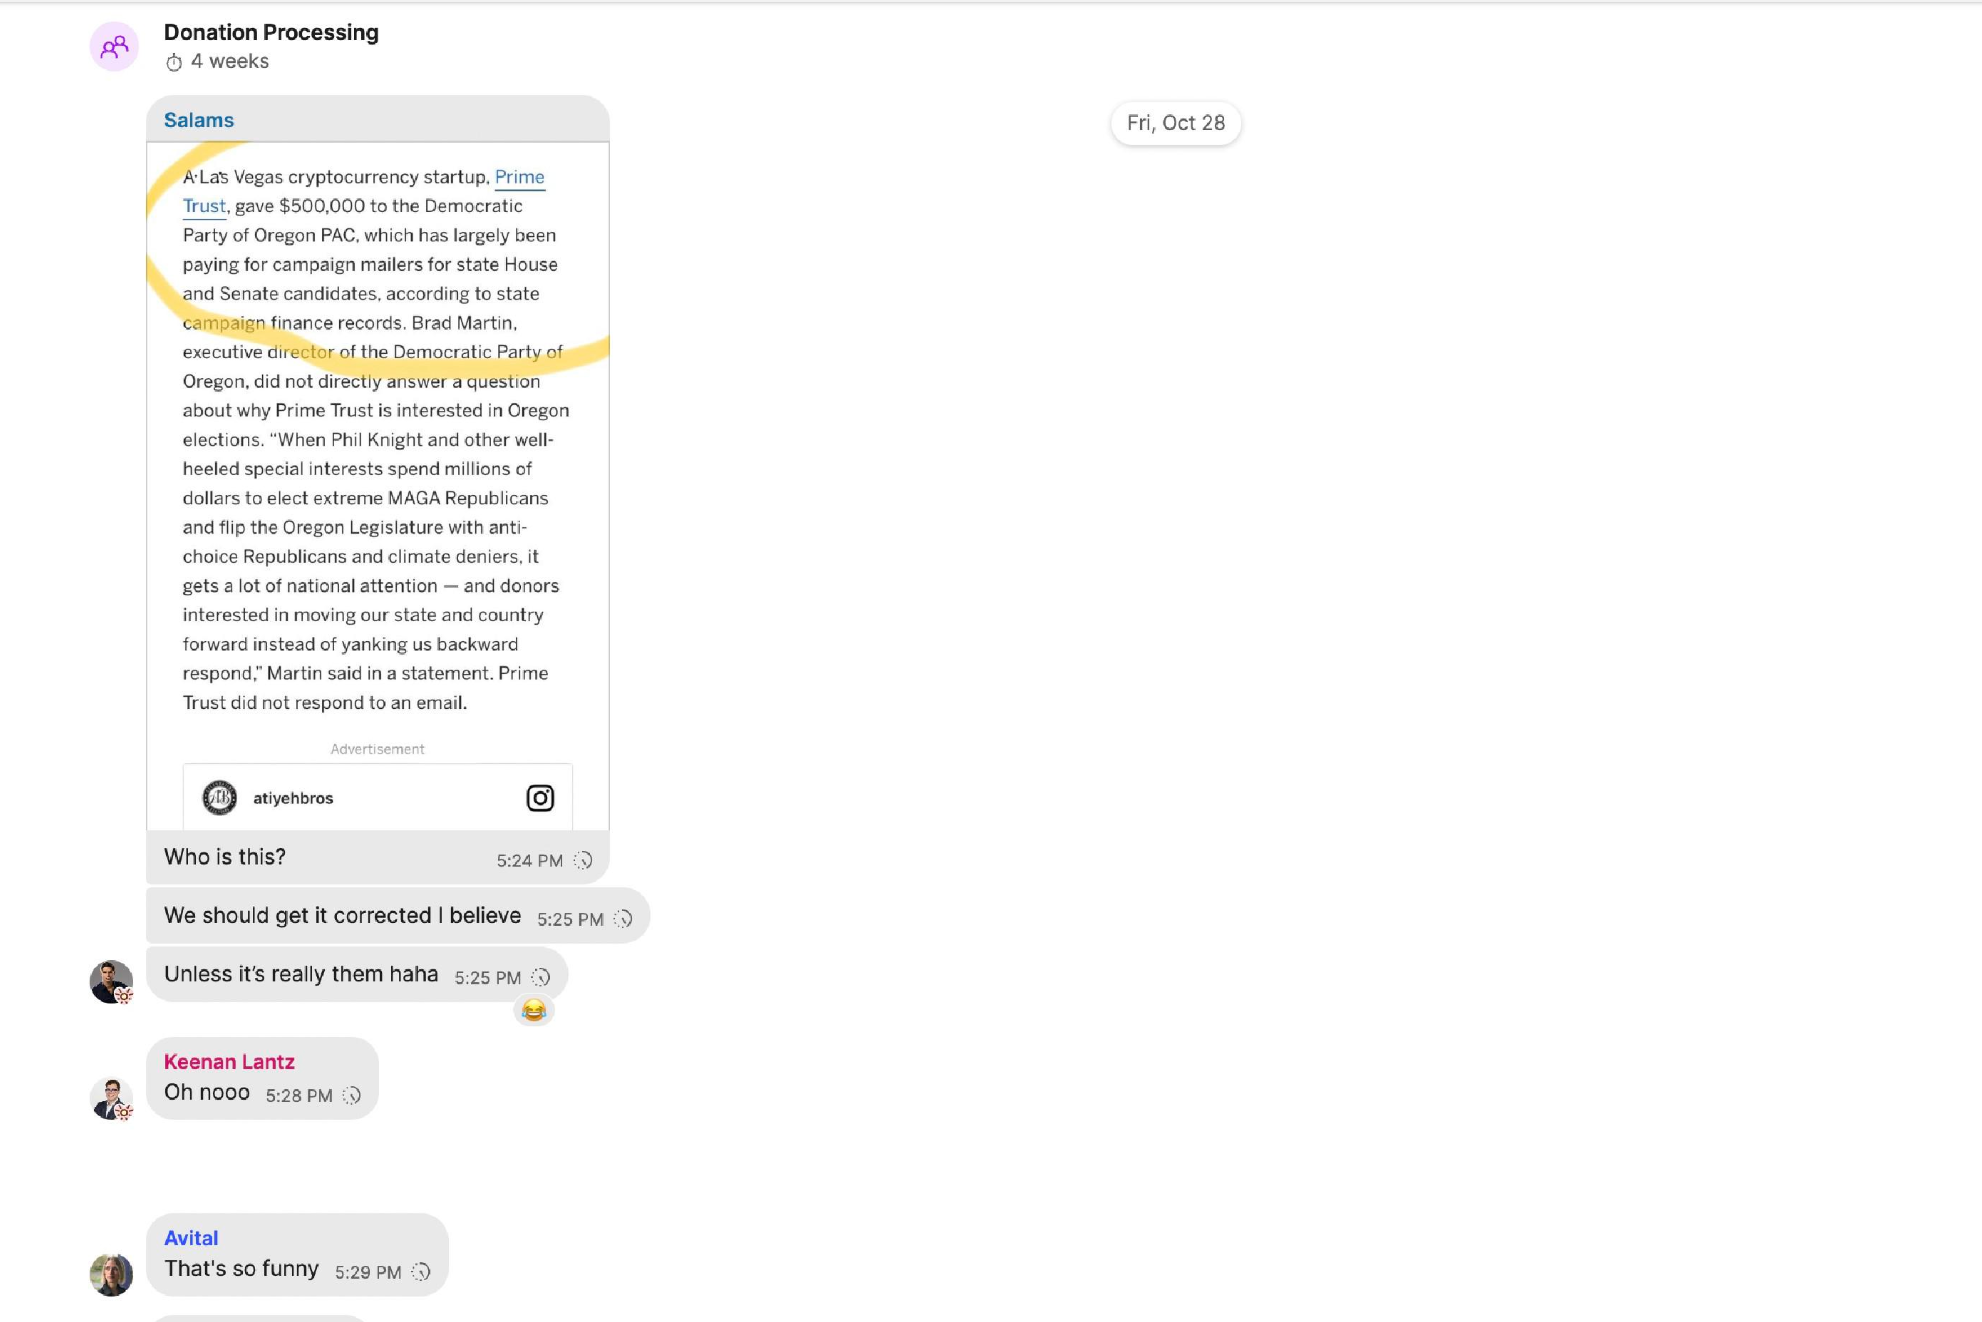 A "Donation Processing" conversation between Ryan Salame, Keenan Lantz, and Avital Balwit, including a screenshot of an Oregonian article that misattributes a $500,000 donation to the Democratic Party of Oregon PAC as hailing from Prime Trust.